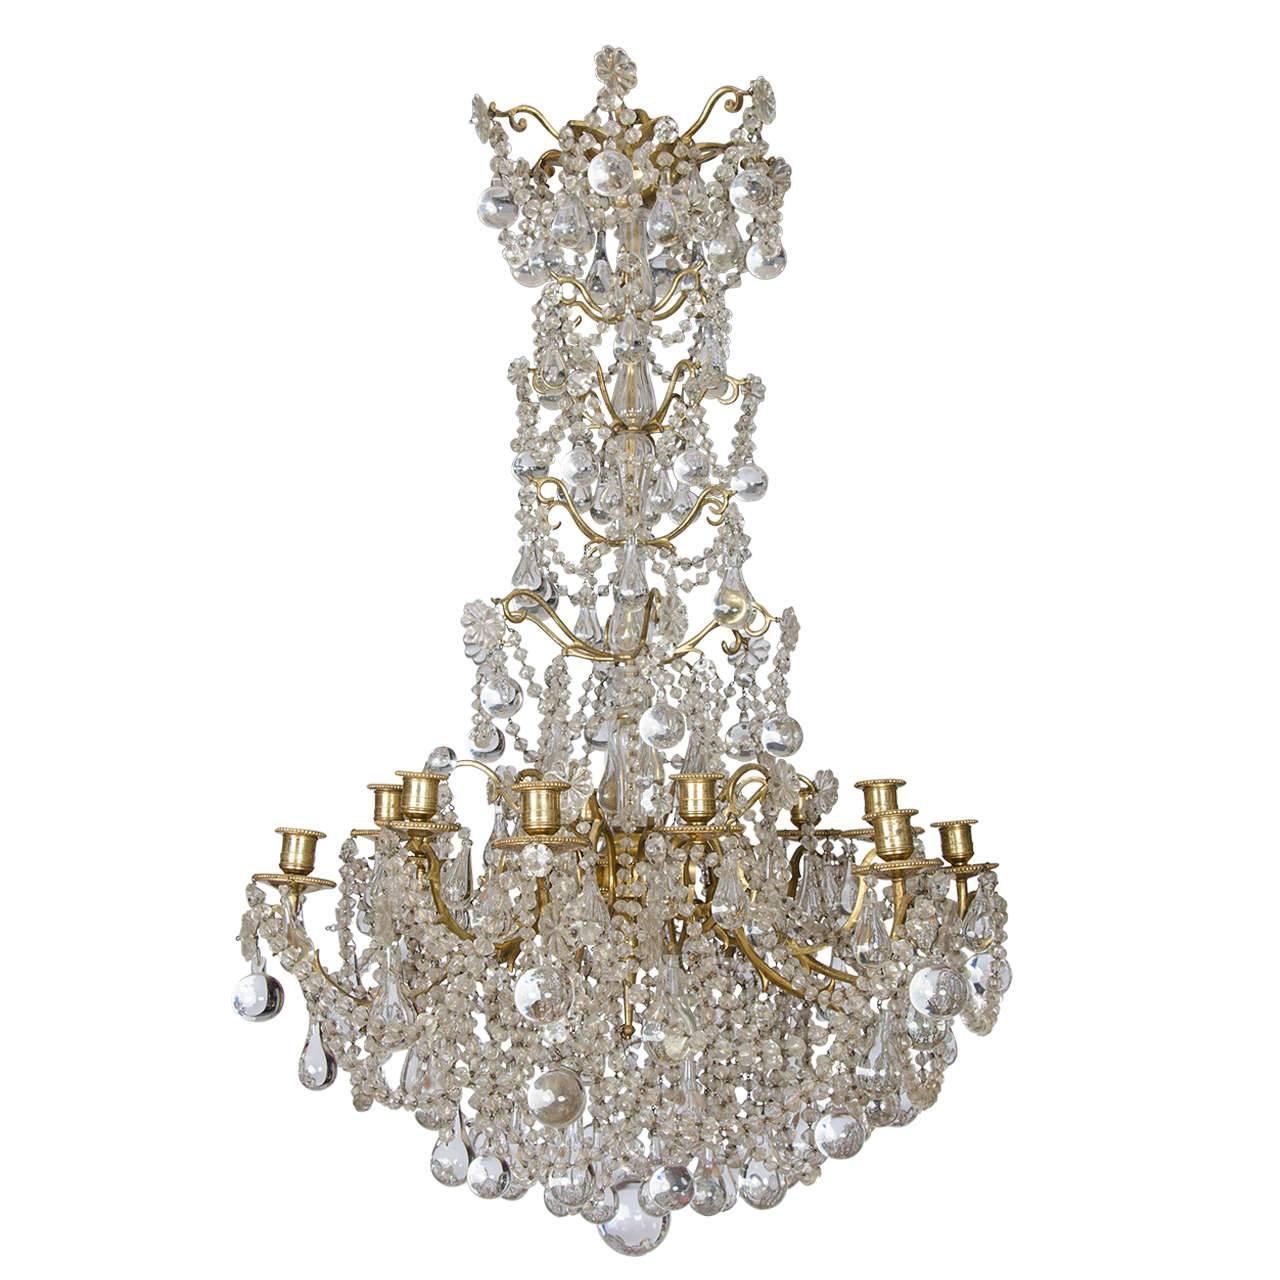 19th Century French Gilt Crystal and Glass Candle Chandelier